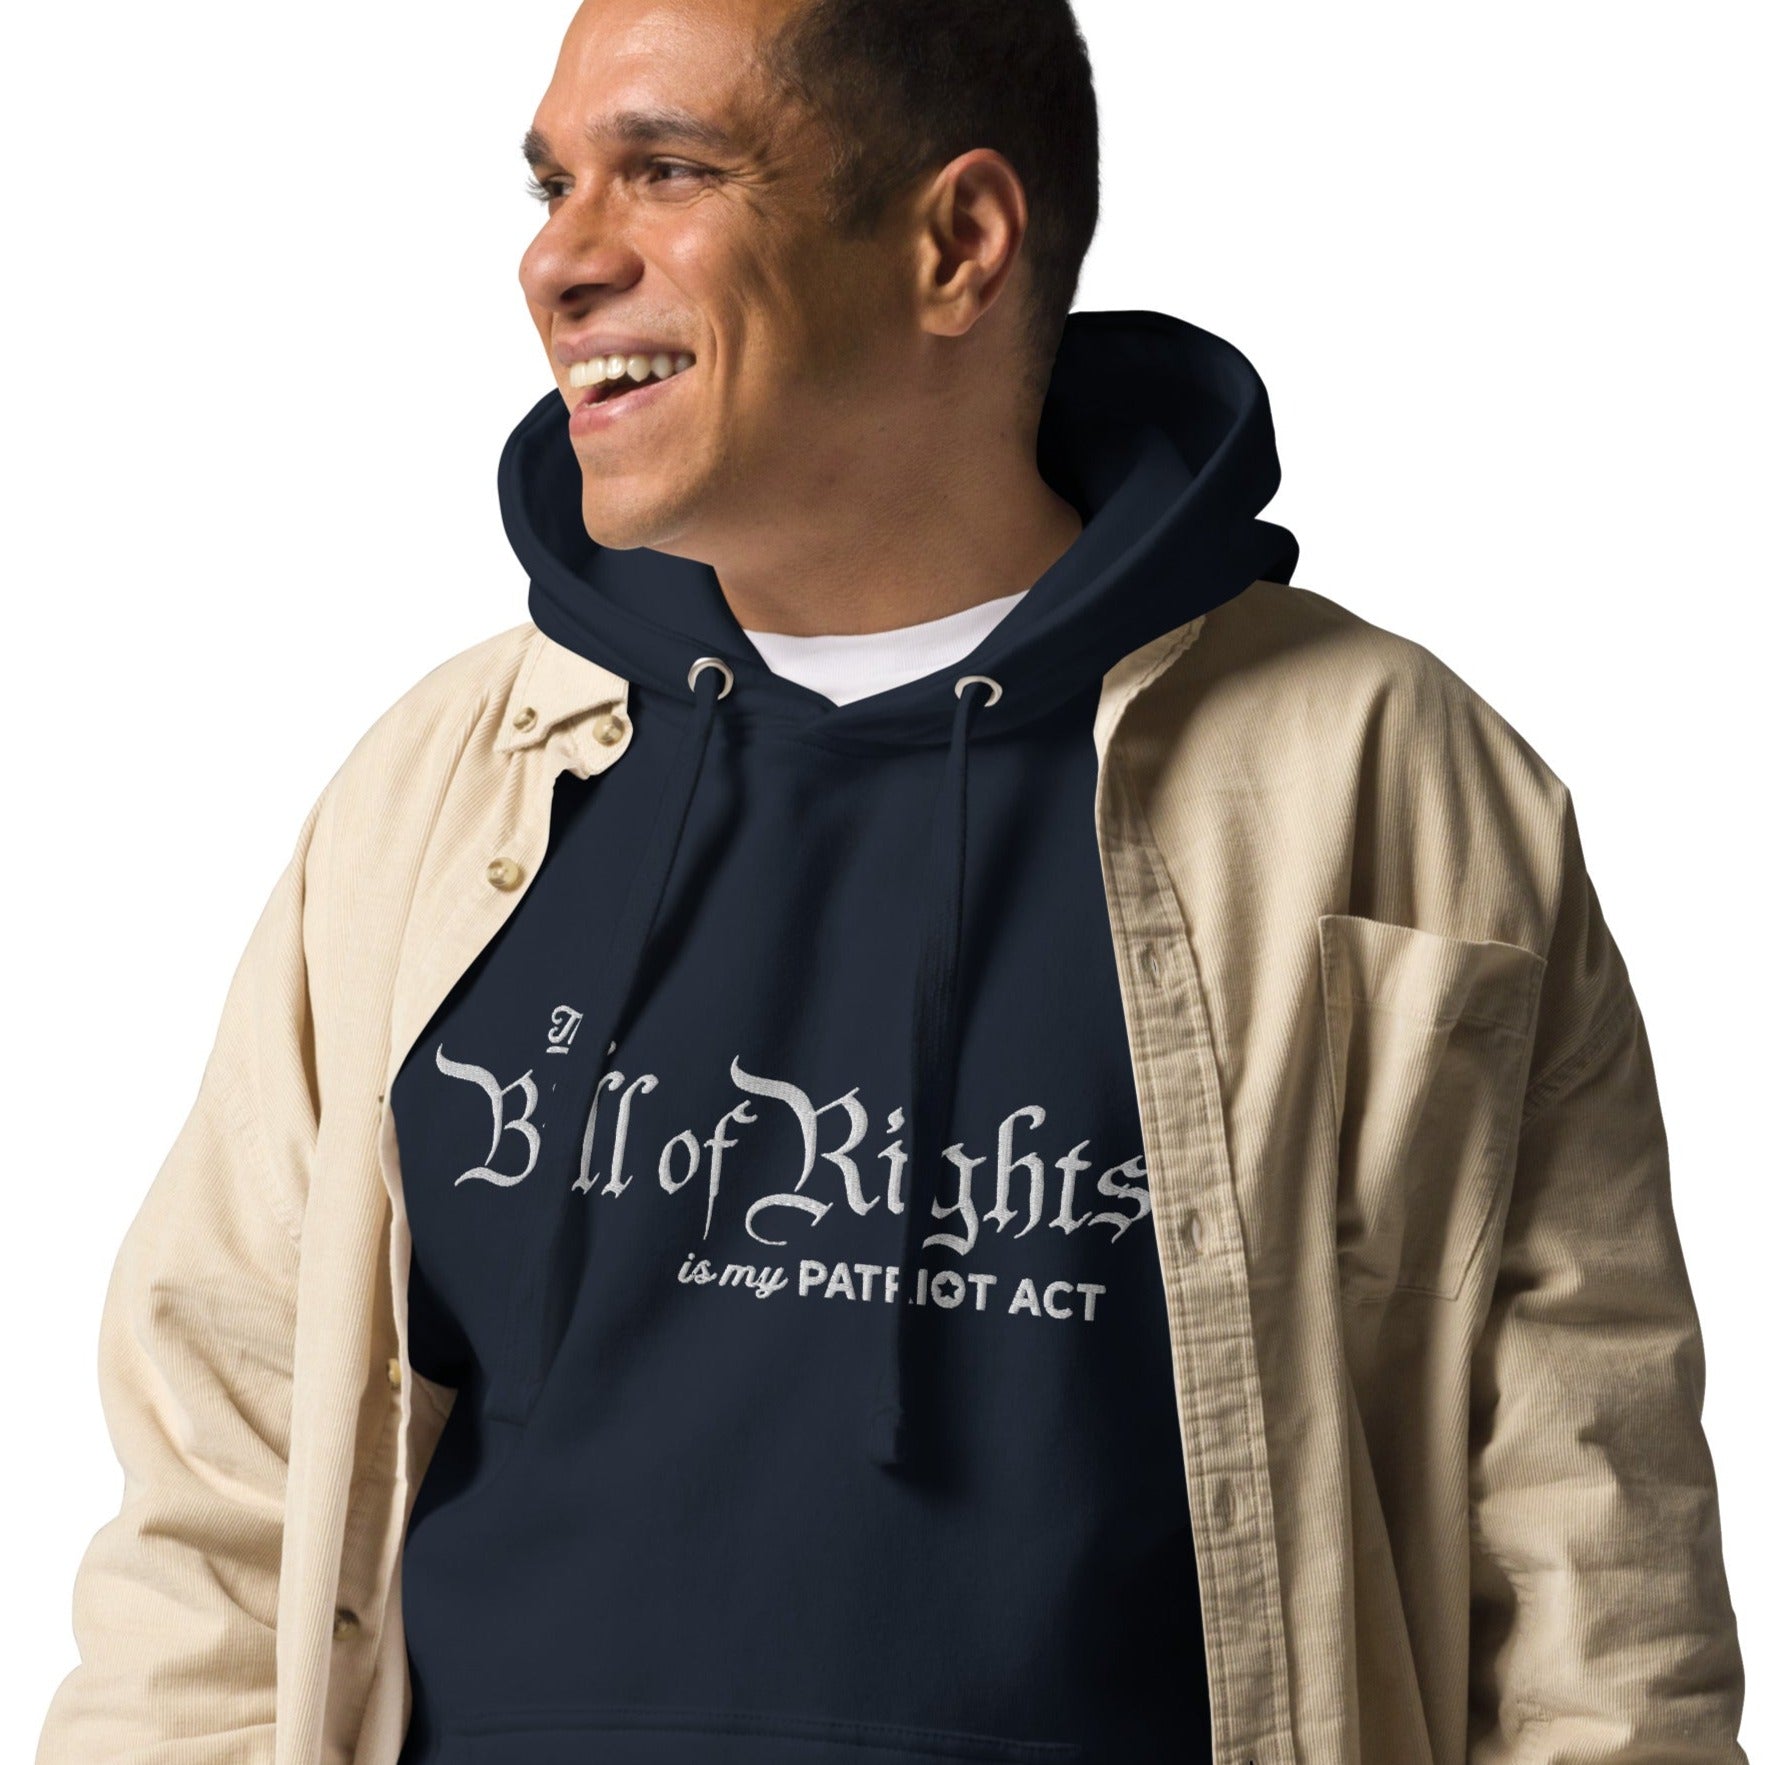 The Bill of Rights Is My Patriot Act Embroidered Hoodie